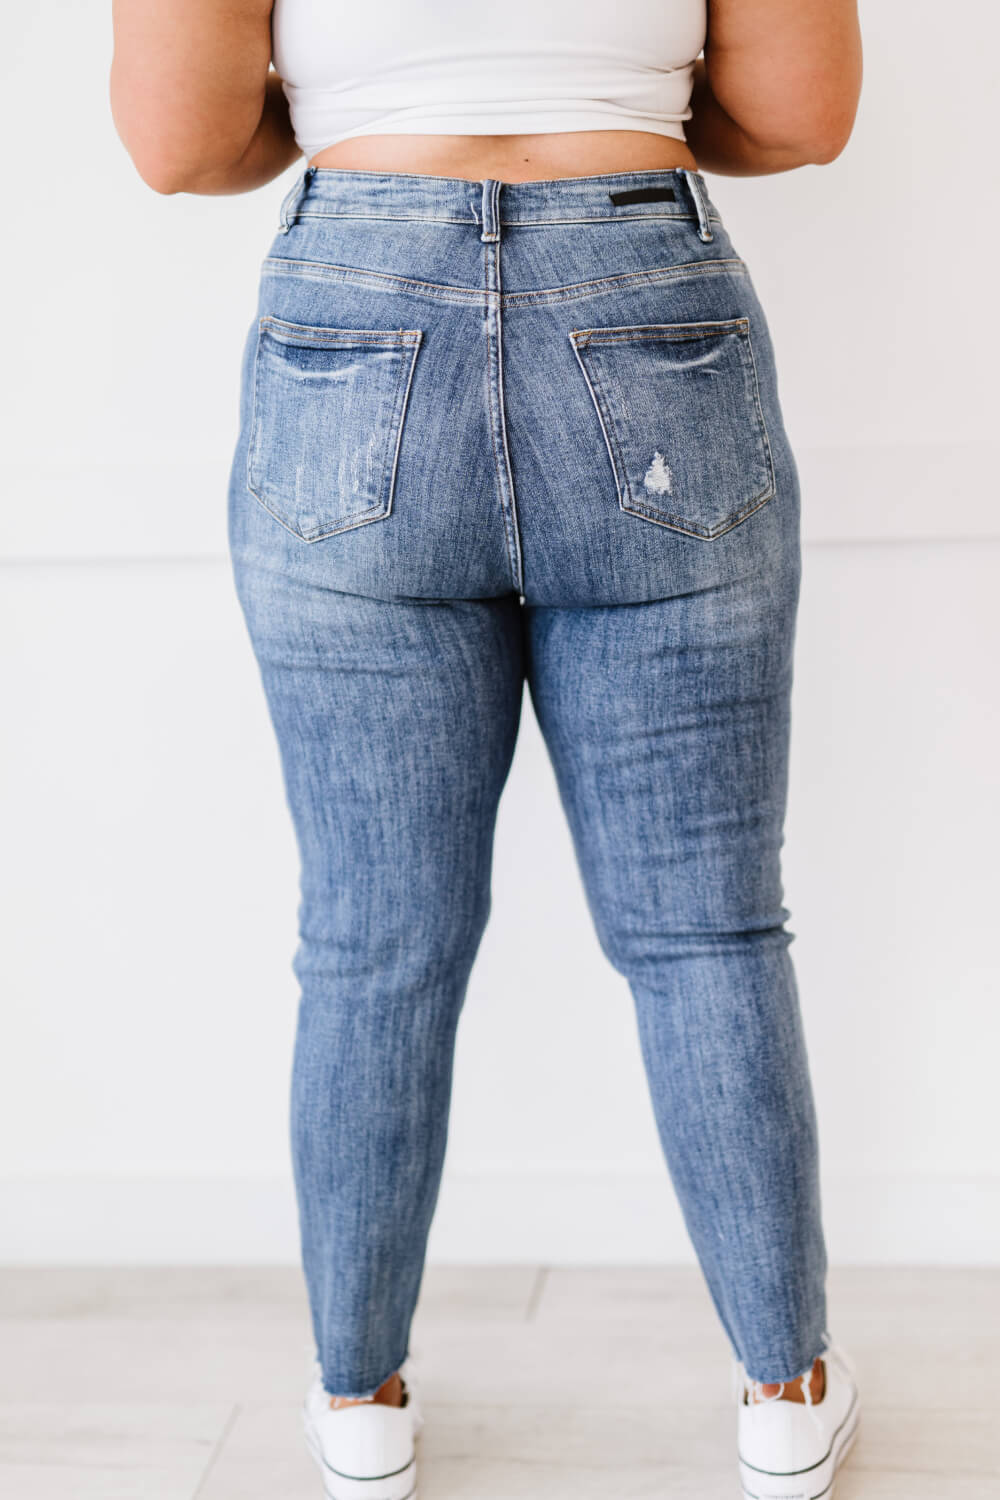 "Melissa Denim" are distressed skinny jeans that are the perfect addition to your wardrobe. They are comfortable and stylish, and can be dressed up or down. The distressed look is perfect for a casual day out, and the skinny fit will show off your curves. These are a medium wash. Sizes 3-11